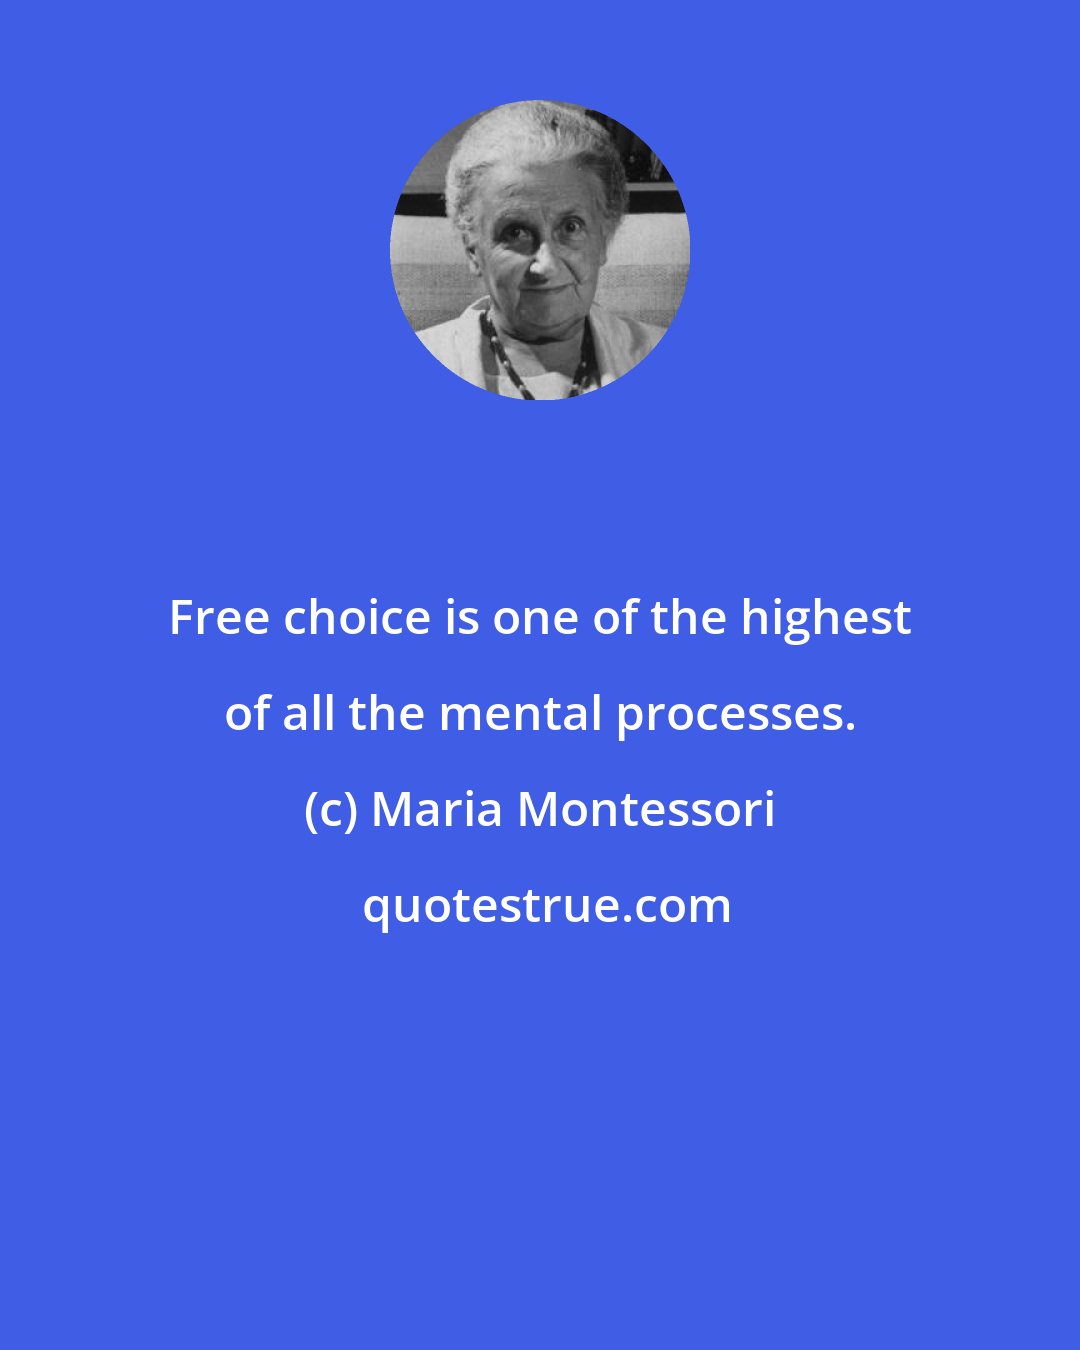 Maria Montessori: Free choice is one of the highest of all the mental processes.